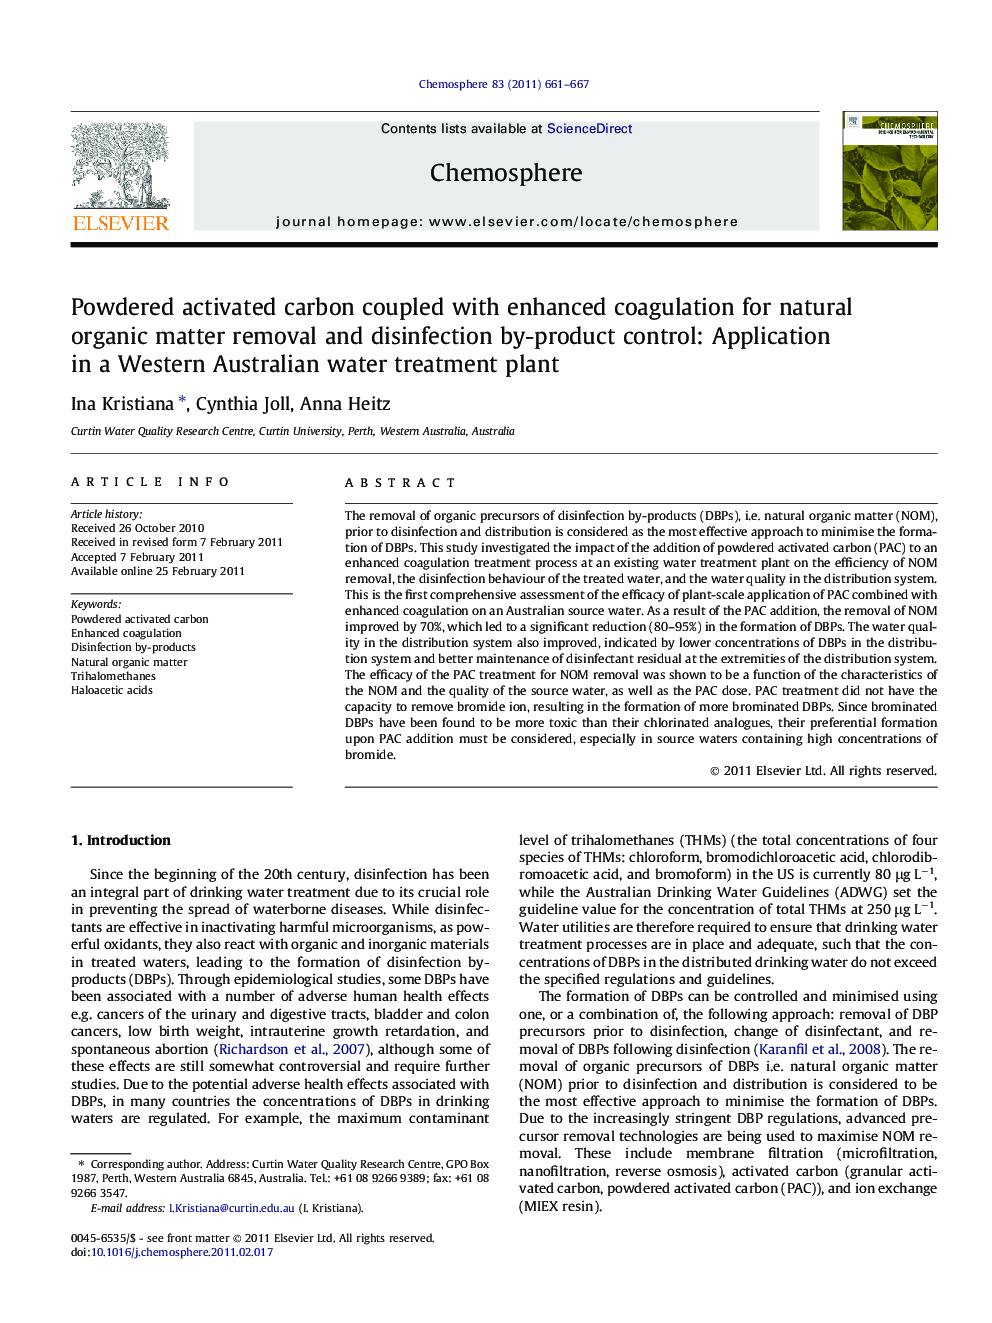 Powdered activated carbon coupled with enhanced coagulation for natural organic matter removal and disinfection by-product control: Application in a Western Australian water treatment plant